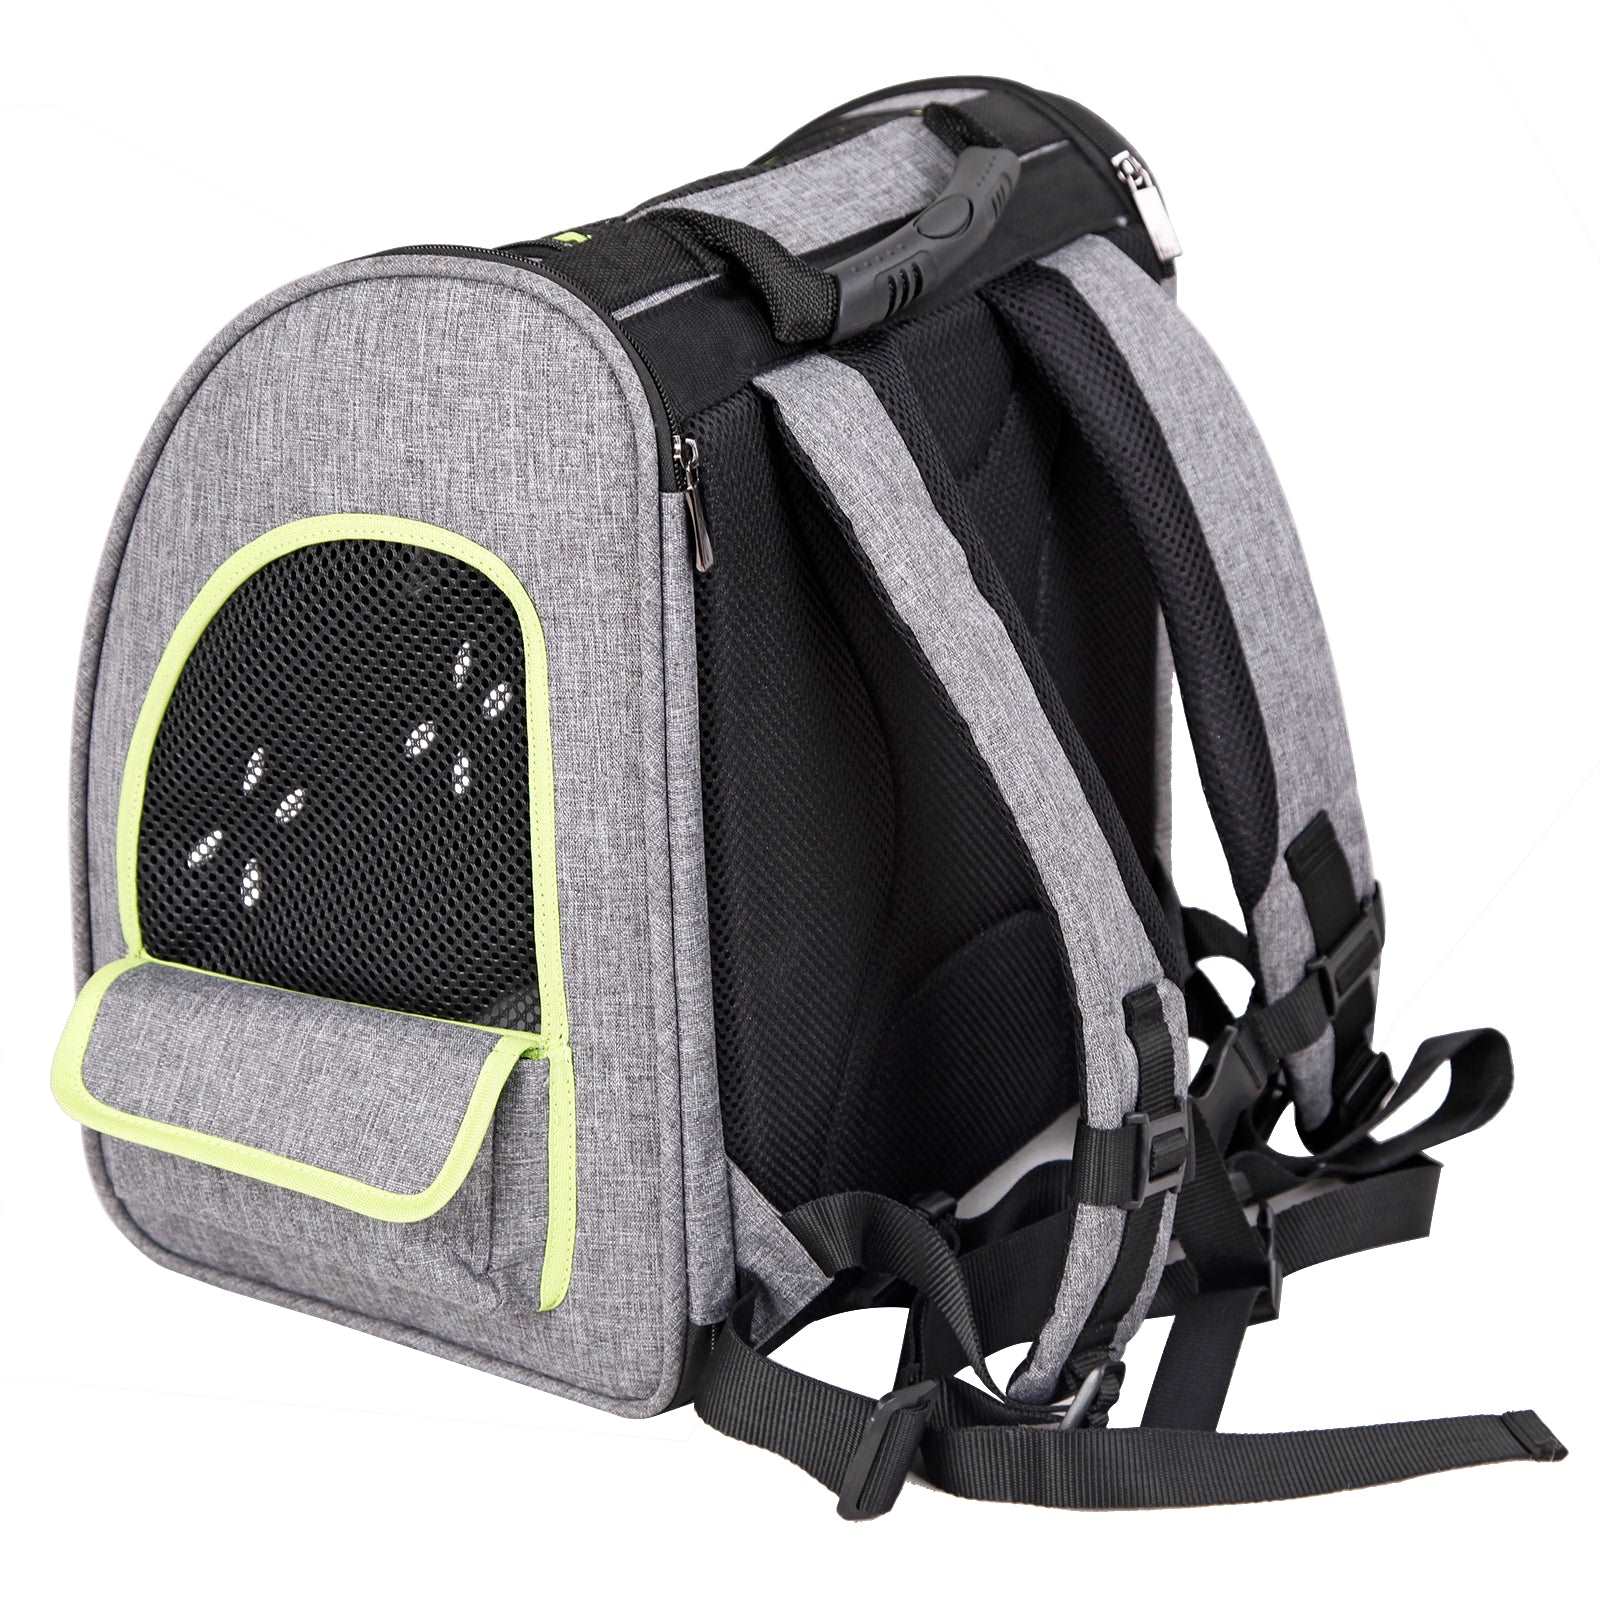 Petsfit-Cat-and-Dog-Backpack-Carrier-Soft-Side-with-Good-Ventilation-06